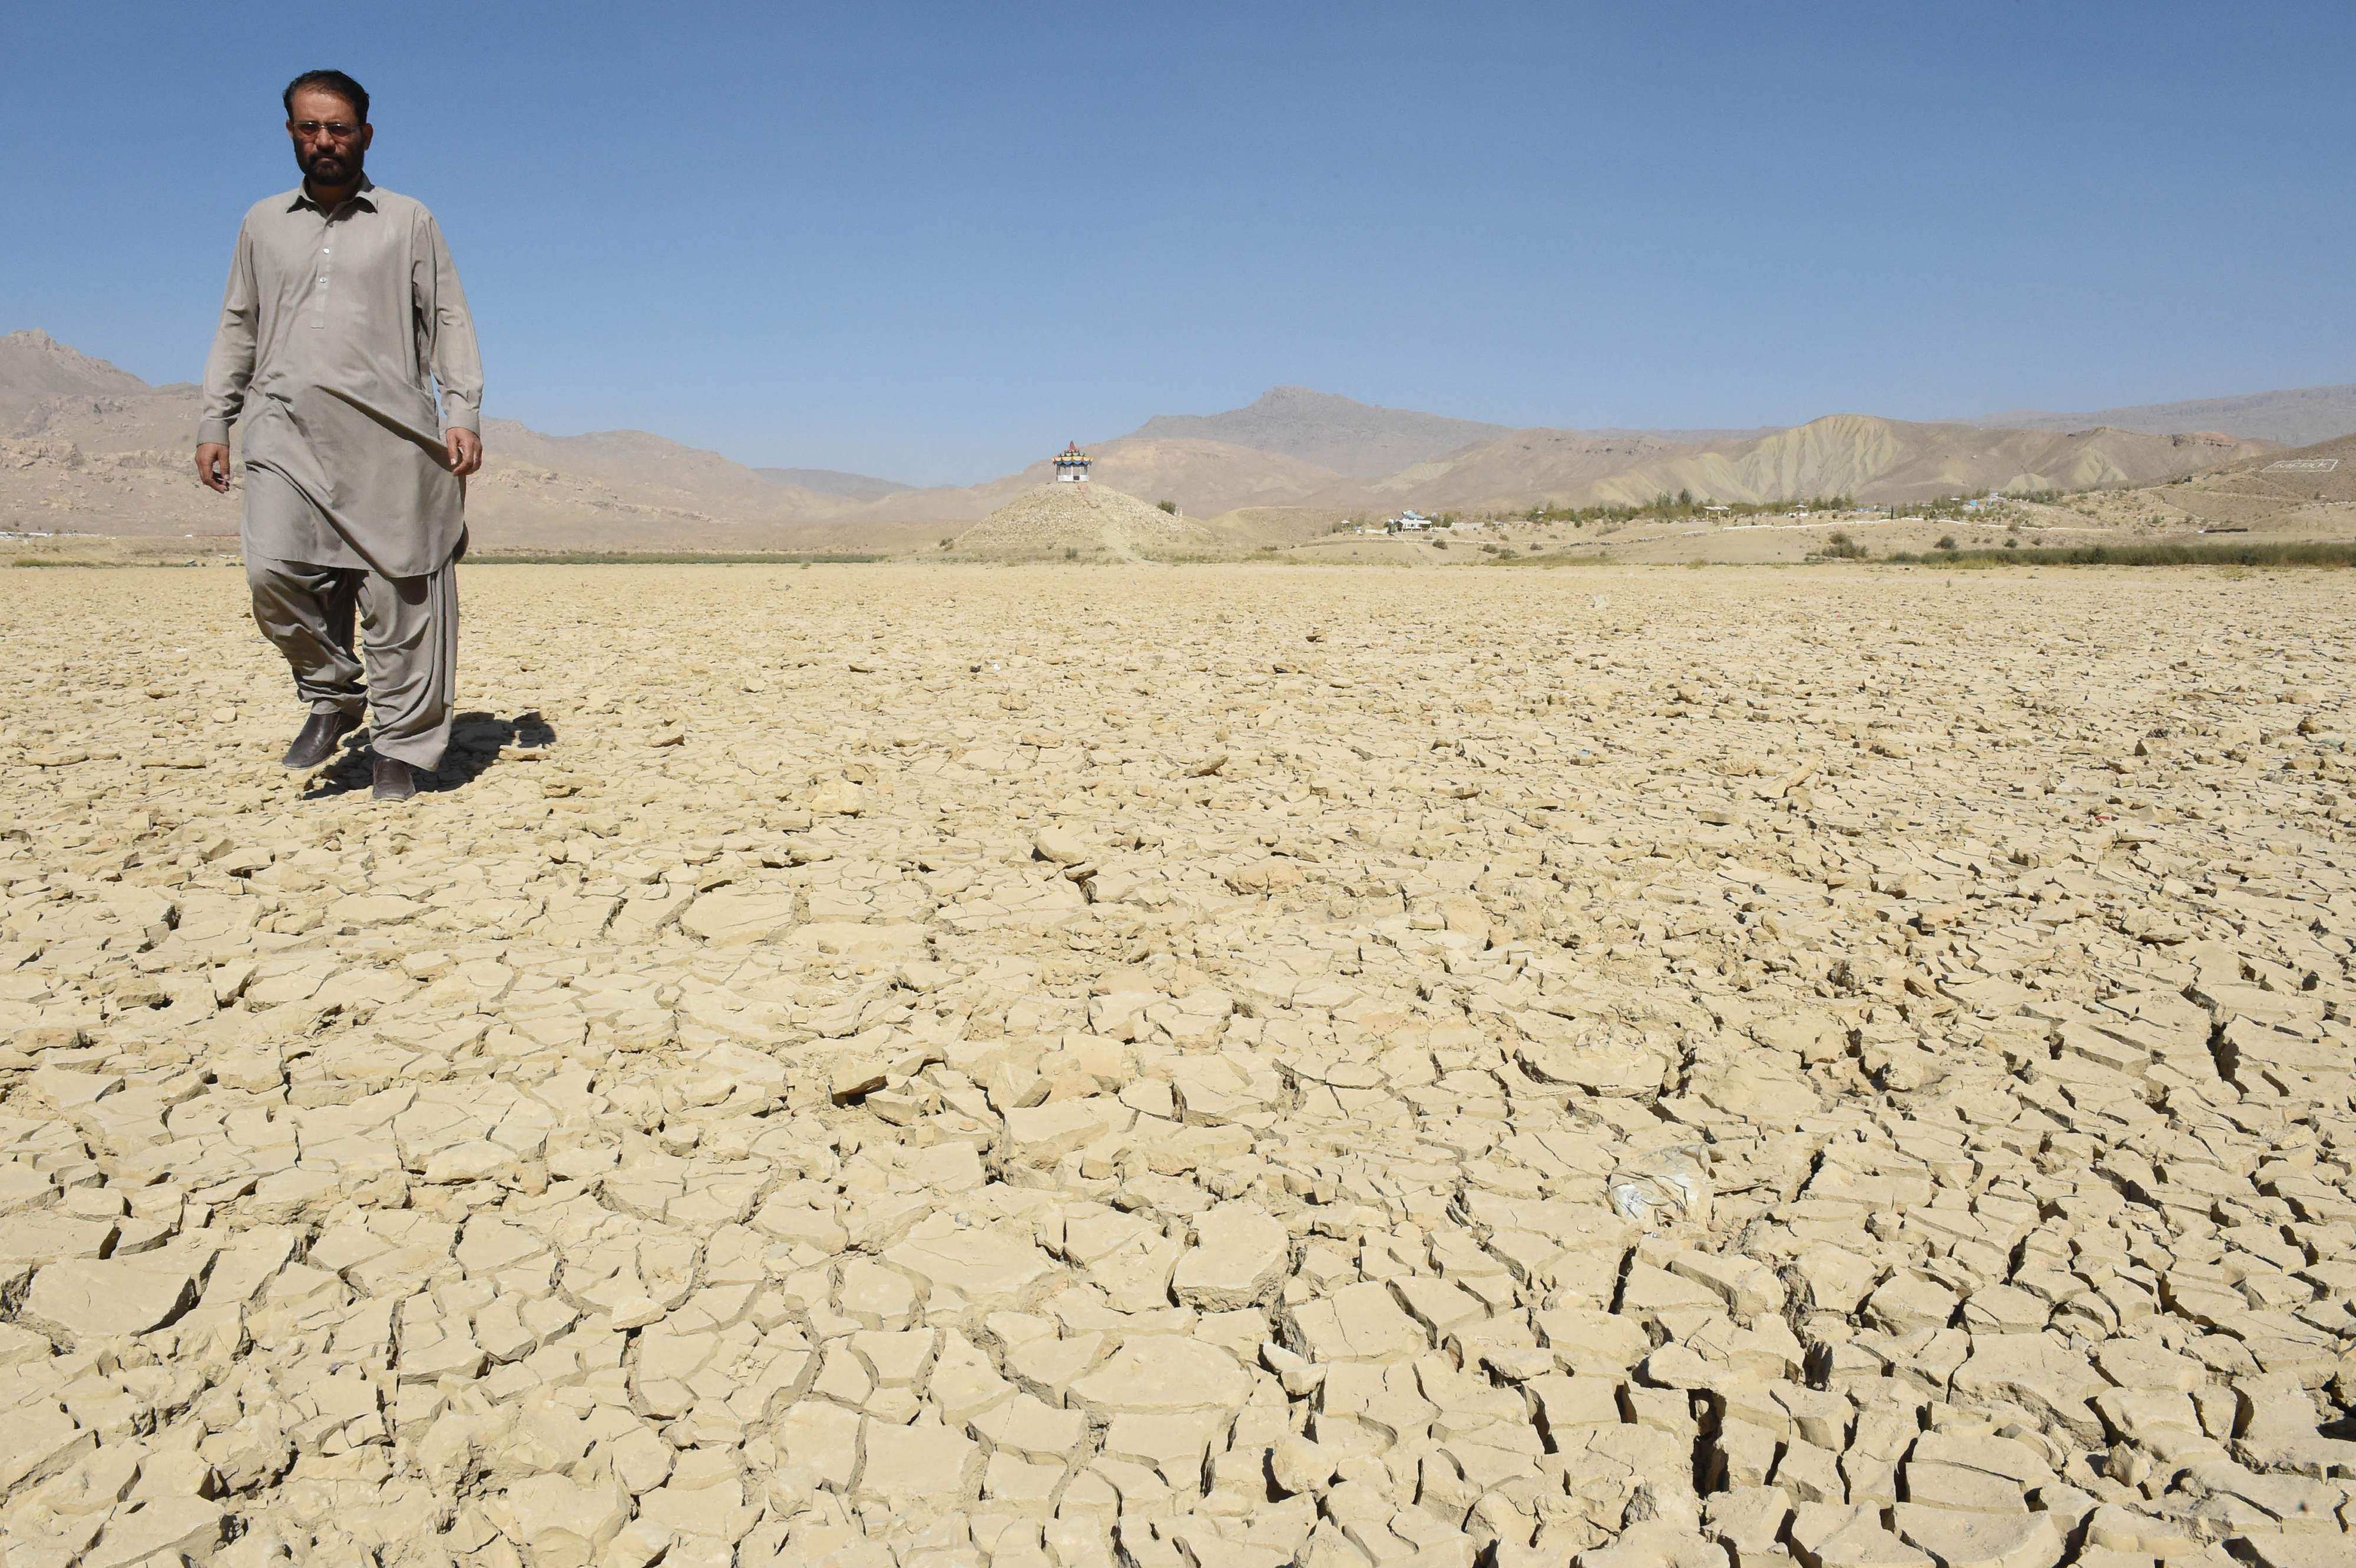 A Pakistani villager walks on the dry Hanna lake in Urak Valley, some 15km from Quetta, on October 6, 2018. Some half a million people have been displaced because of severe droughts caused by a lack of rain. Photo: AFP